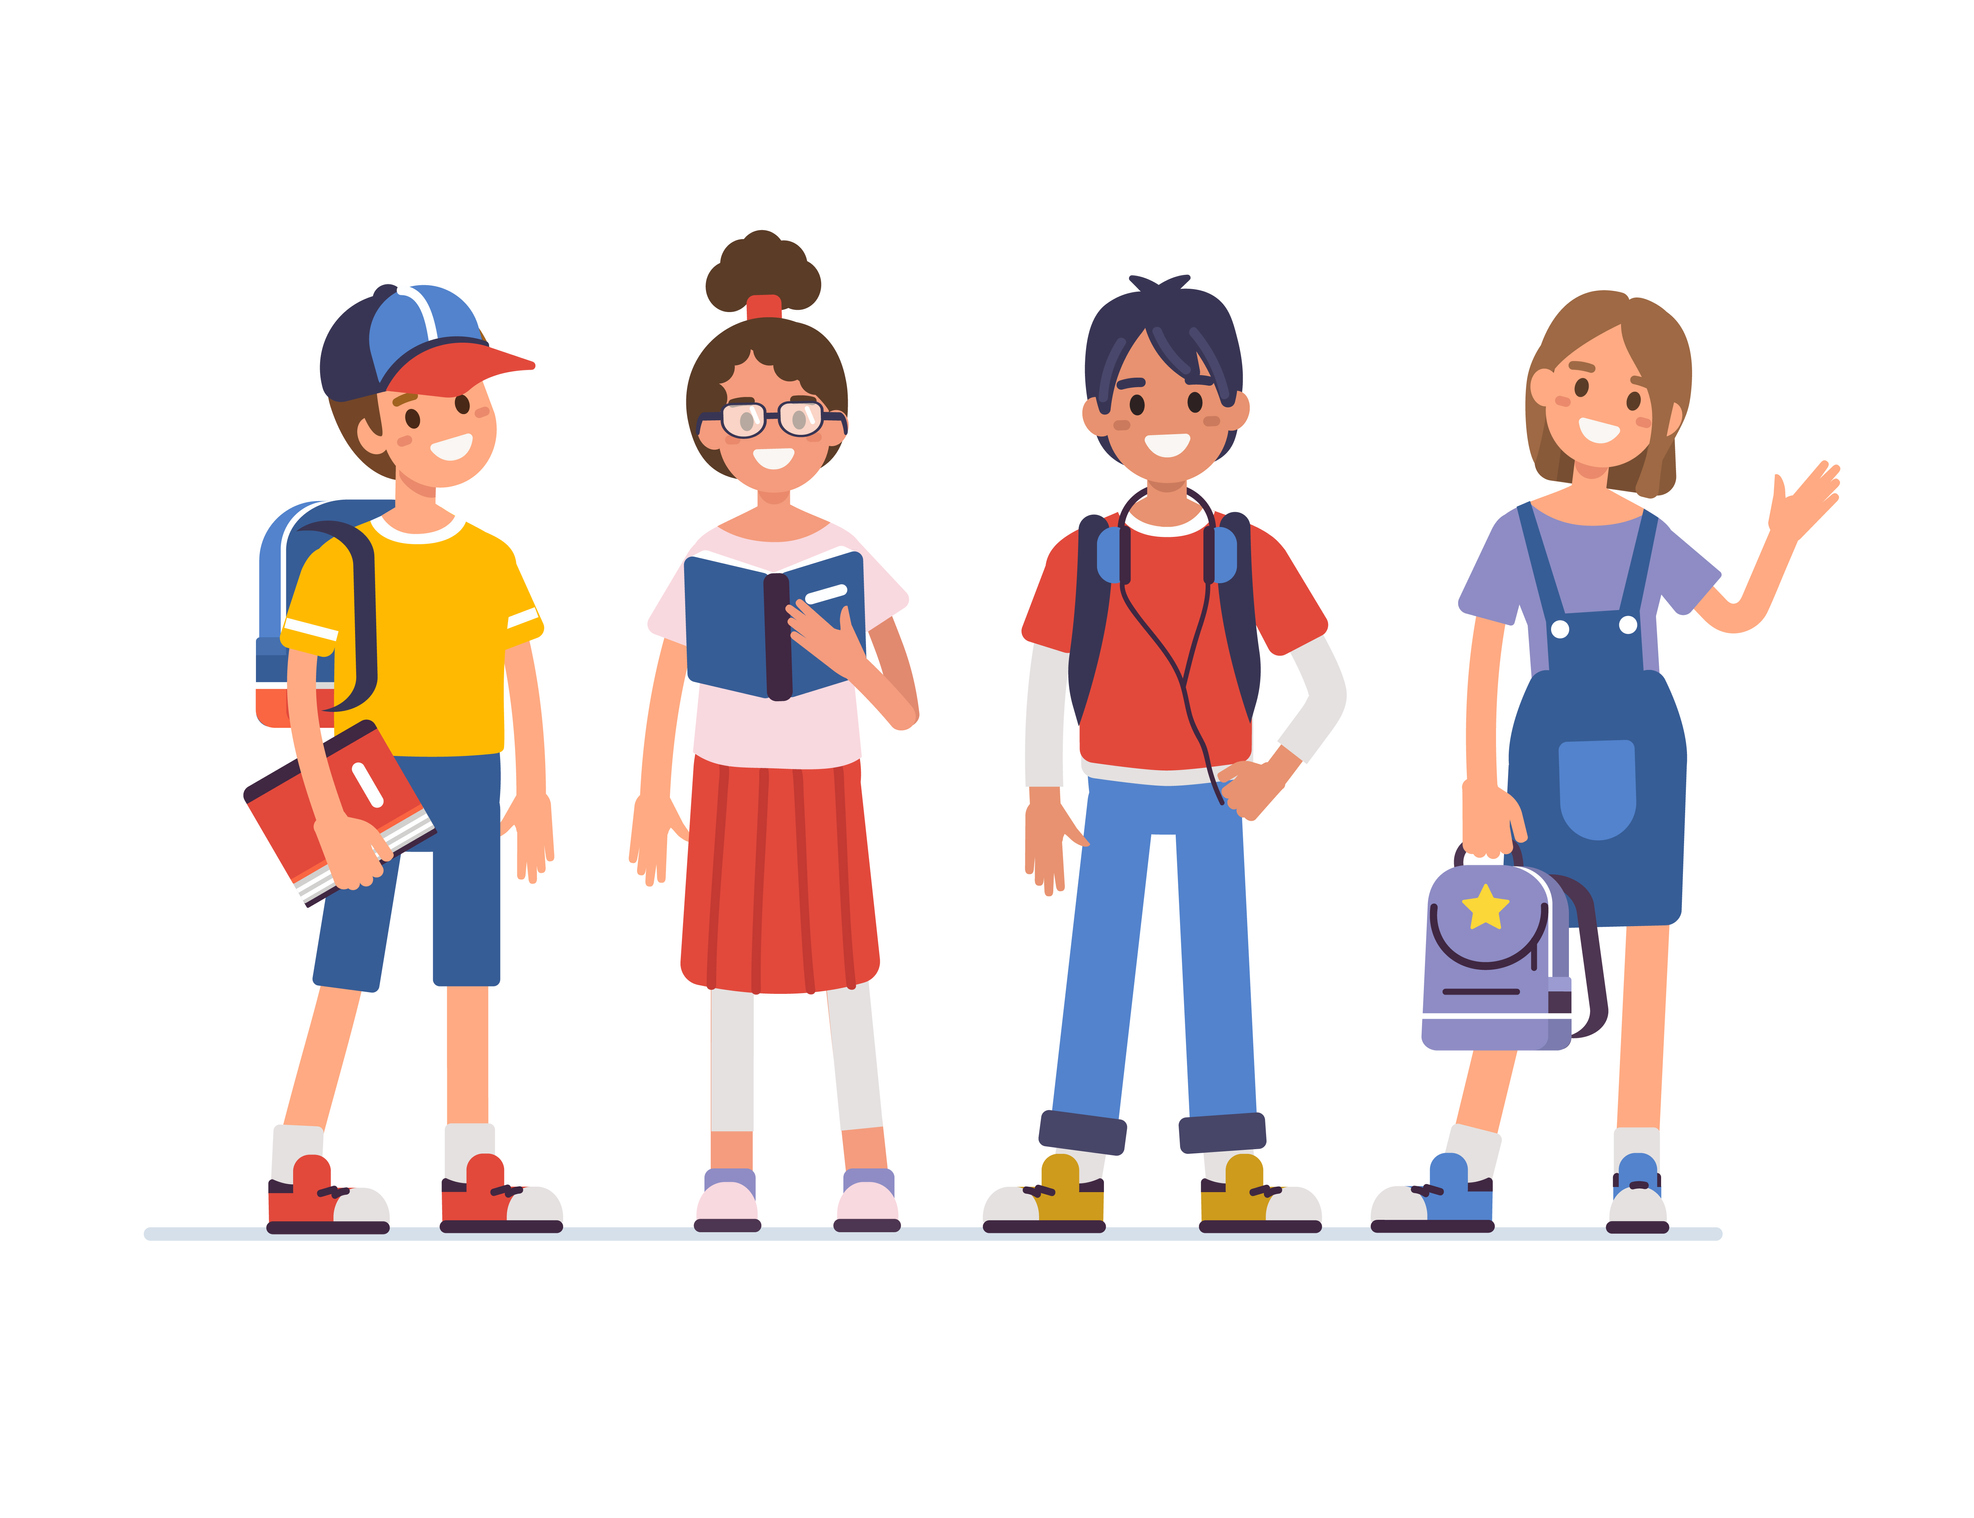 School kids standing together. Flat cartoon style vector illustration isolated on white background.